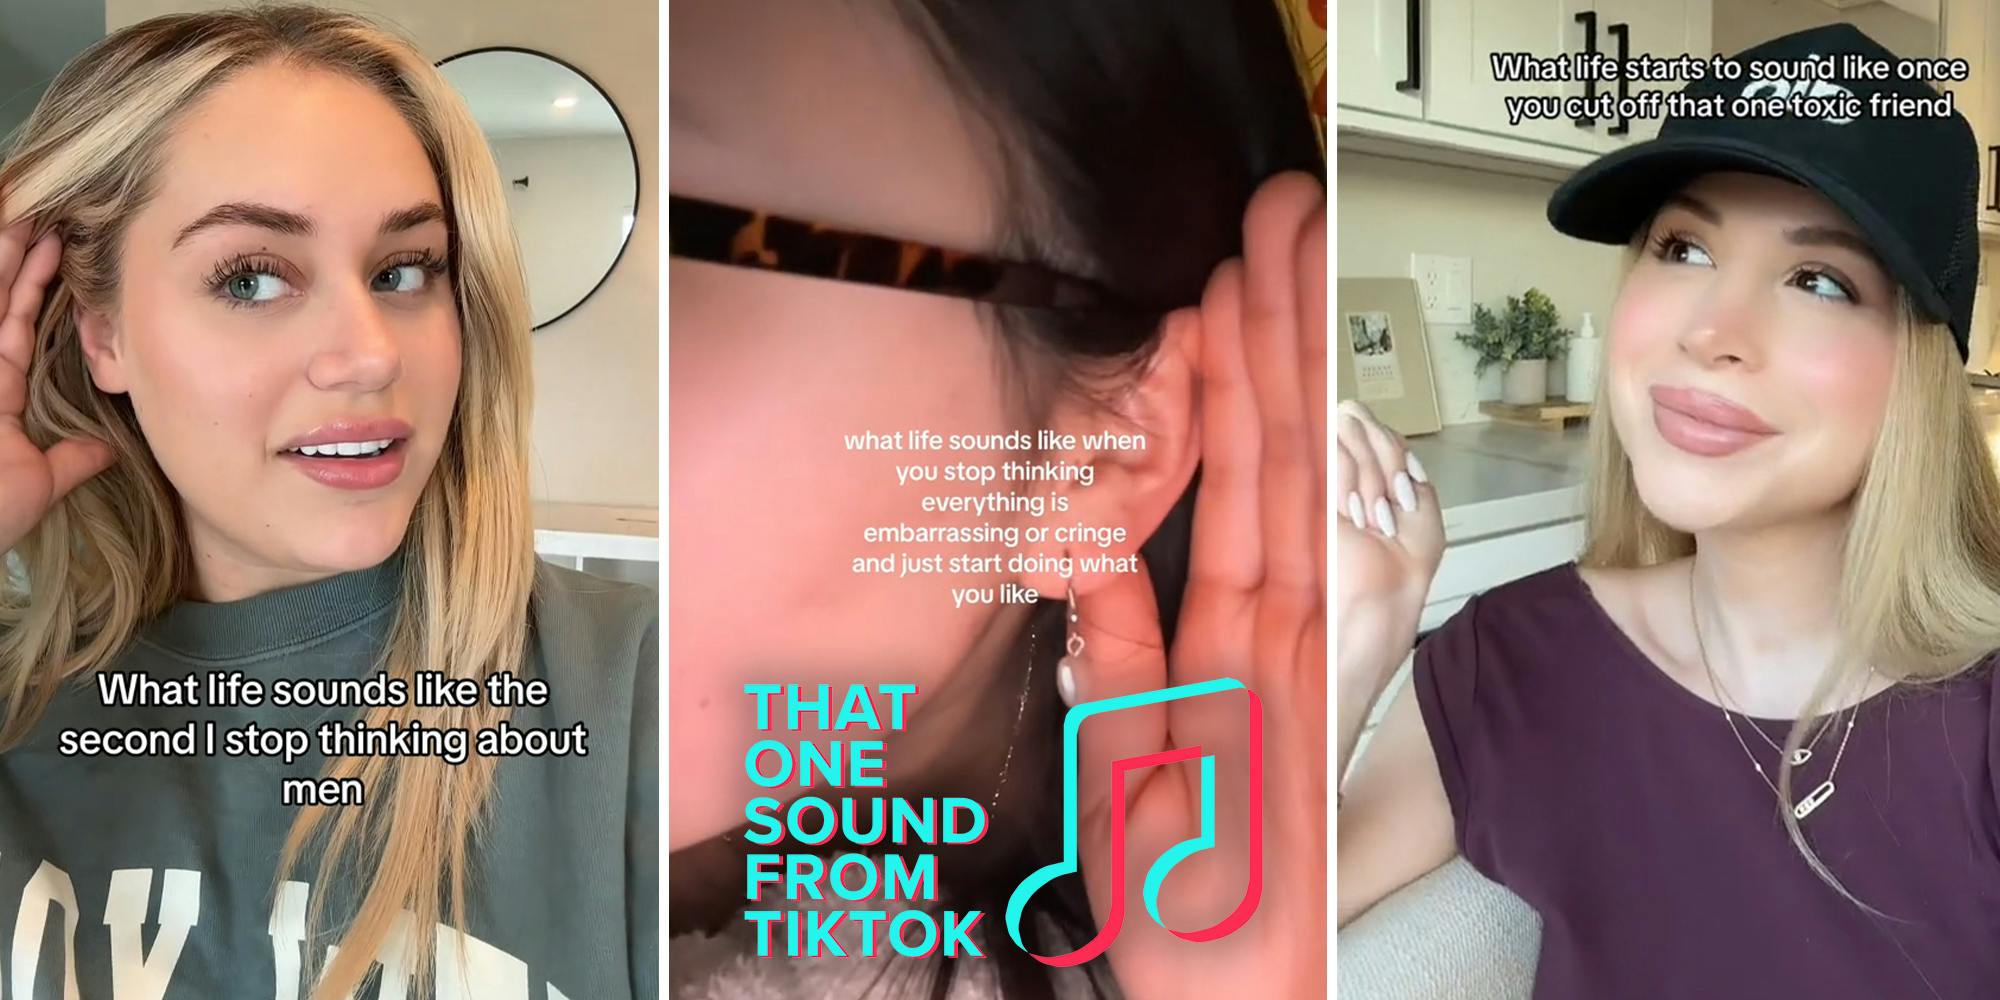 ‘How life sounds’: This TikTok trend is about embracing your peace—and letting go